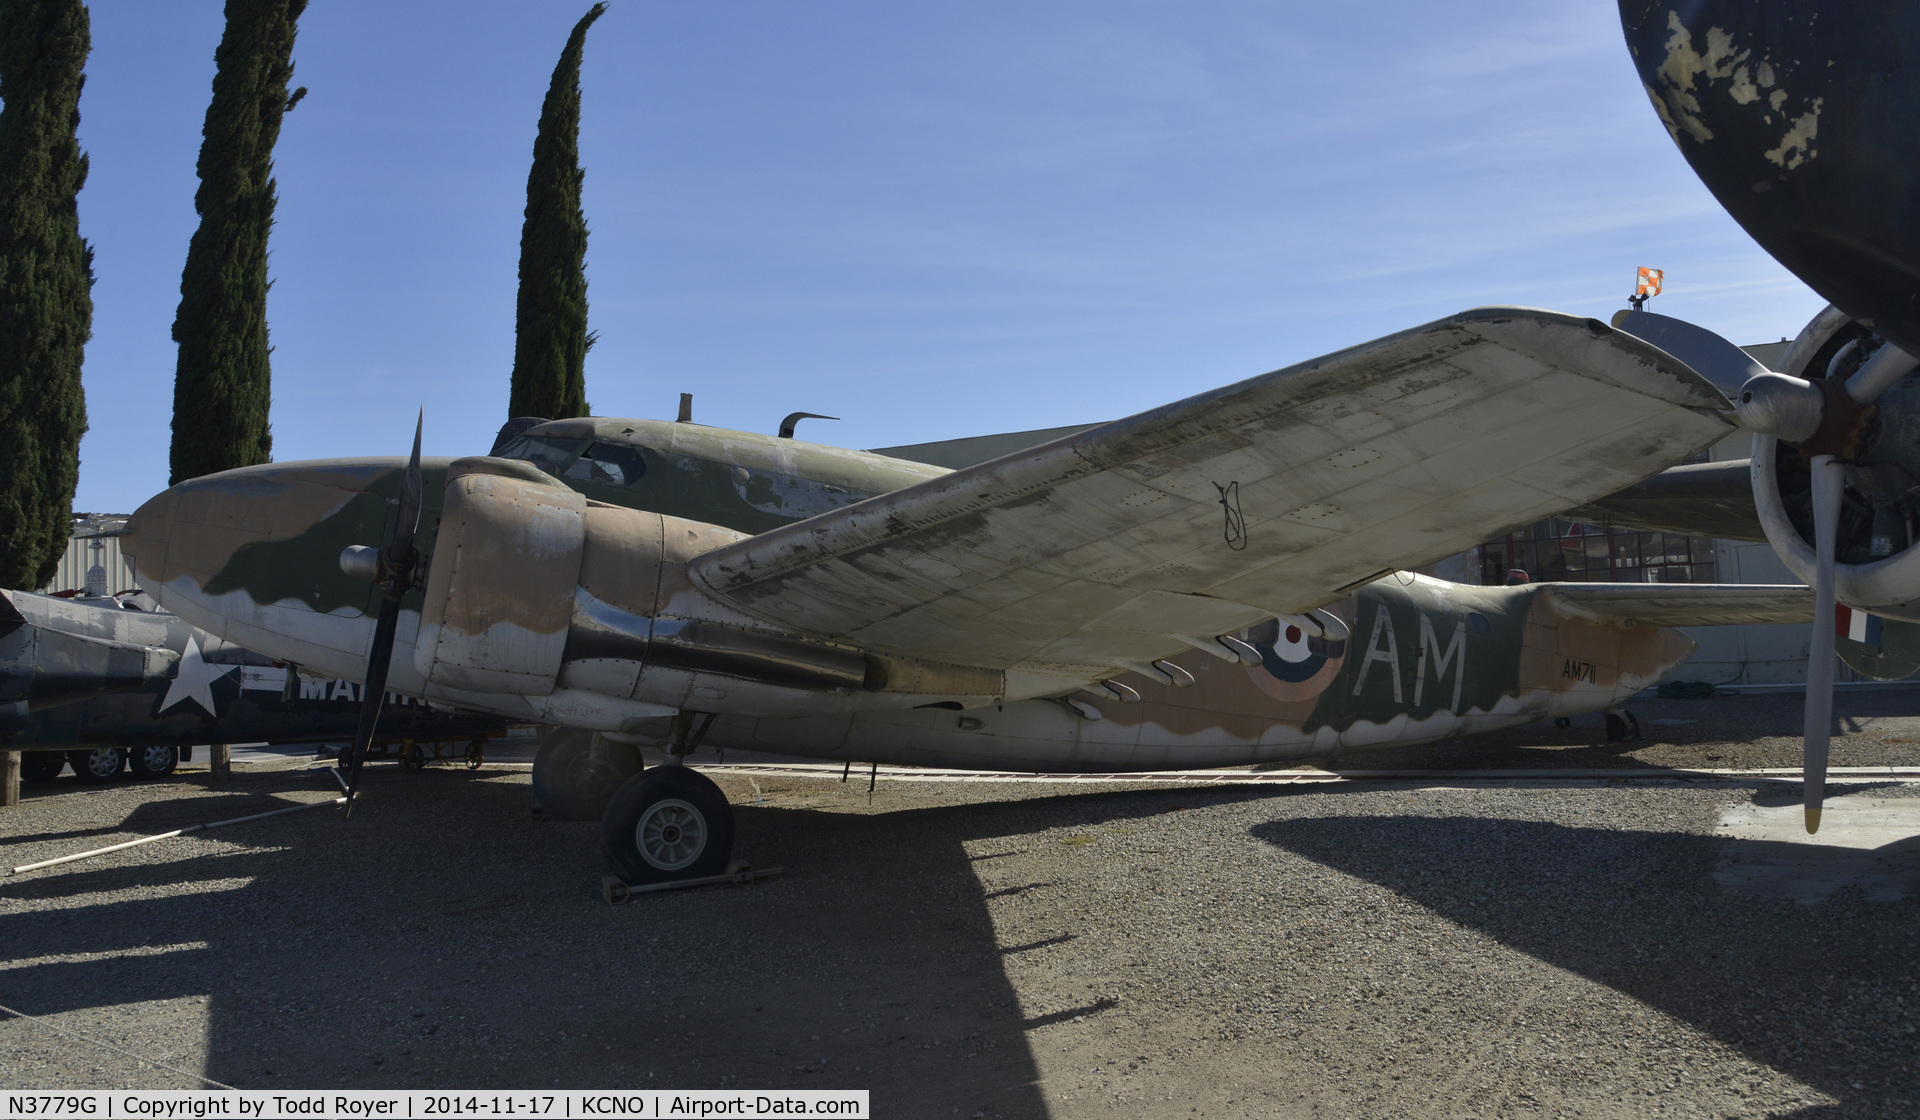 N3779G, Lockheed 18-56 Lodestar C/N 2201, On display at the Planes of Fame Chino location